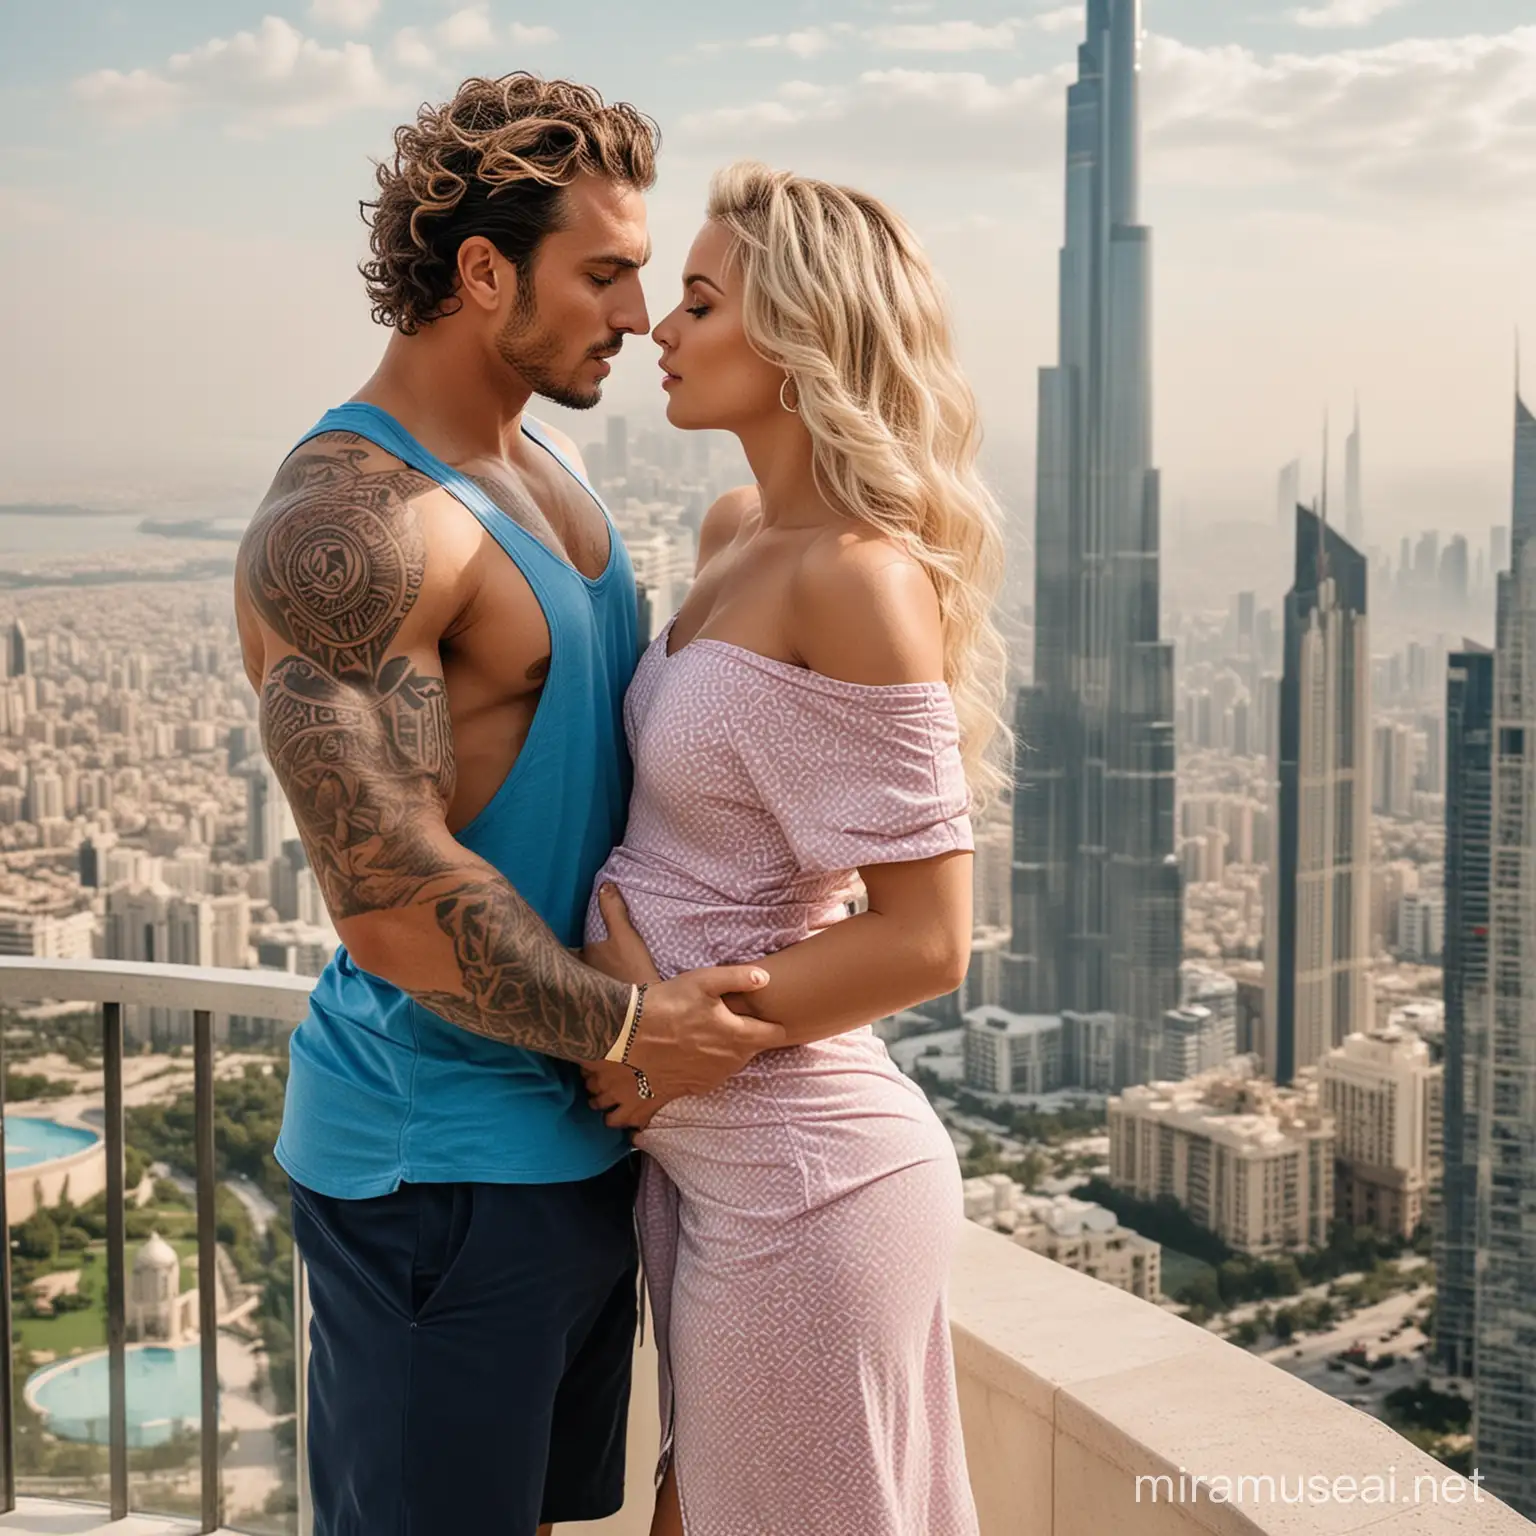 generate a picture of a muscular man who is a football player, has a checkered stomach and a big penis, has light brown short curly hair and blue color, he has tattoos on his arms. This man has a beautiful wife who is pregnant, the woman is blonde and pink, her hair is blue, they are very rich, the woman is the daughter of a king 👑, and the man is a talented soccer player. in the background a large skyscraper is visible from their luxurious 7-story high villa. The woman should be pregnant and show it the man's cute wife is also with him ♥️♥️the woman and the man are kissing , their luxury villa is on the side of the mountain is very high ,the skyscraper should be similar to Burj Khalifa in Dubai